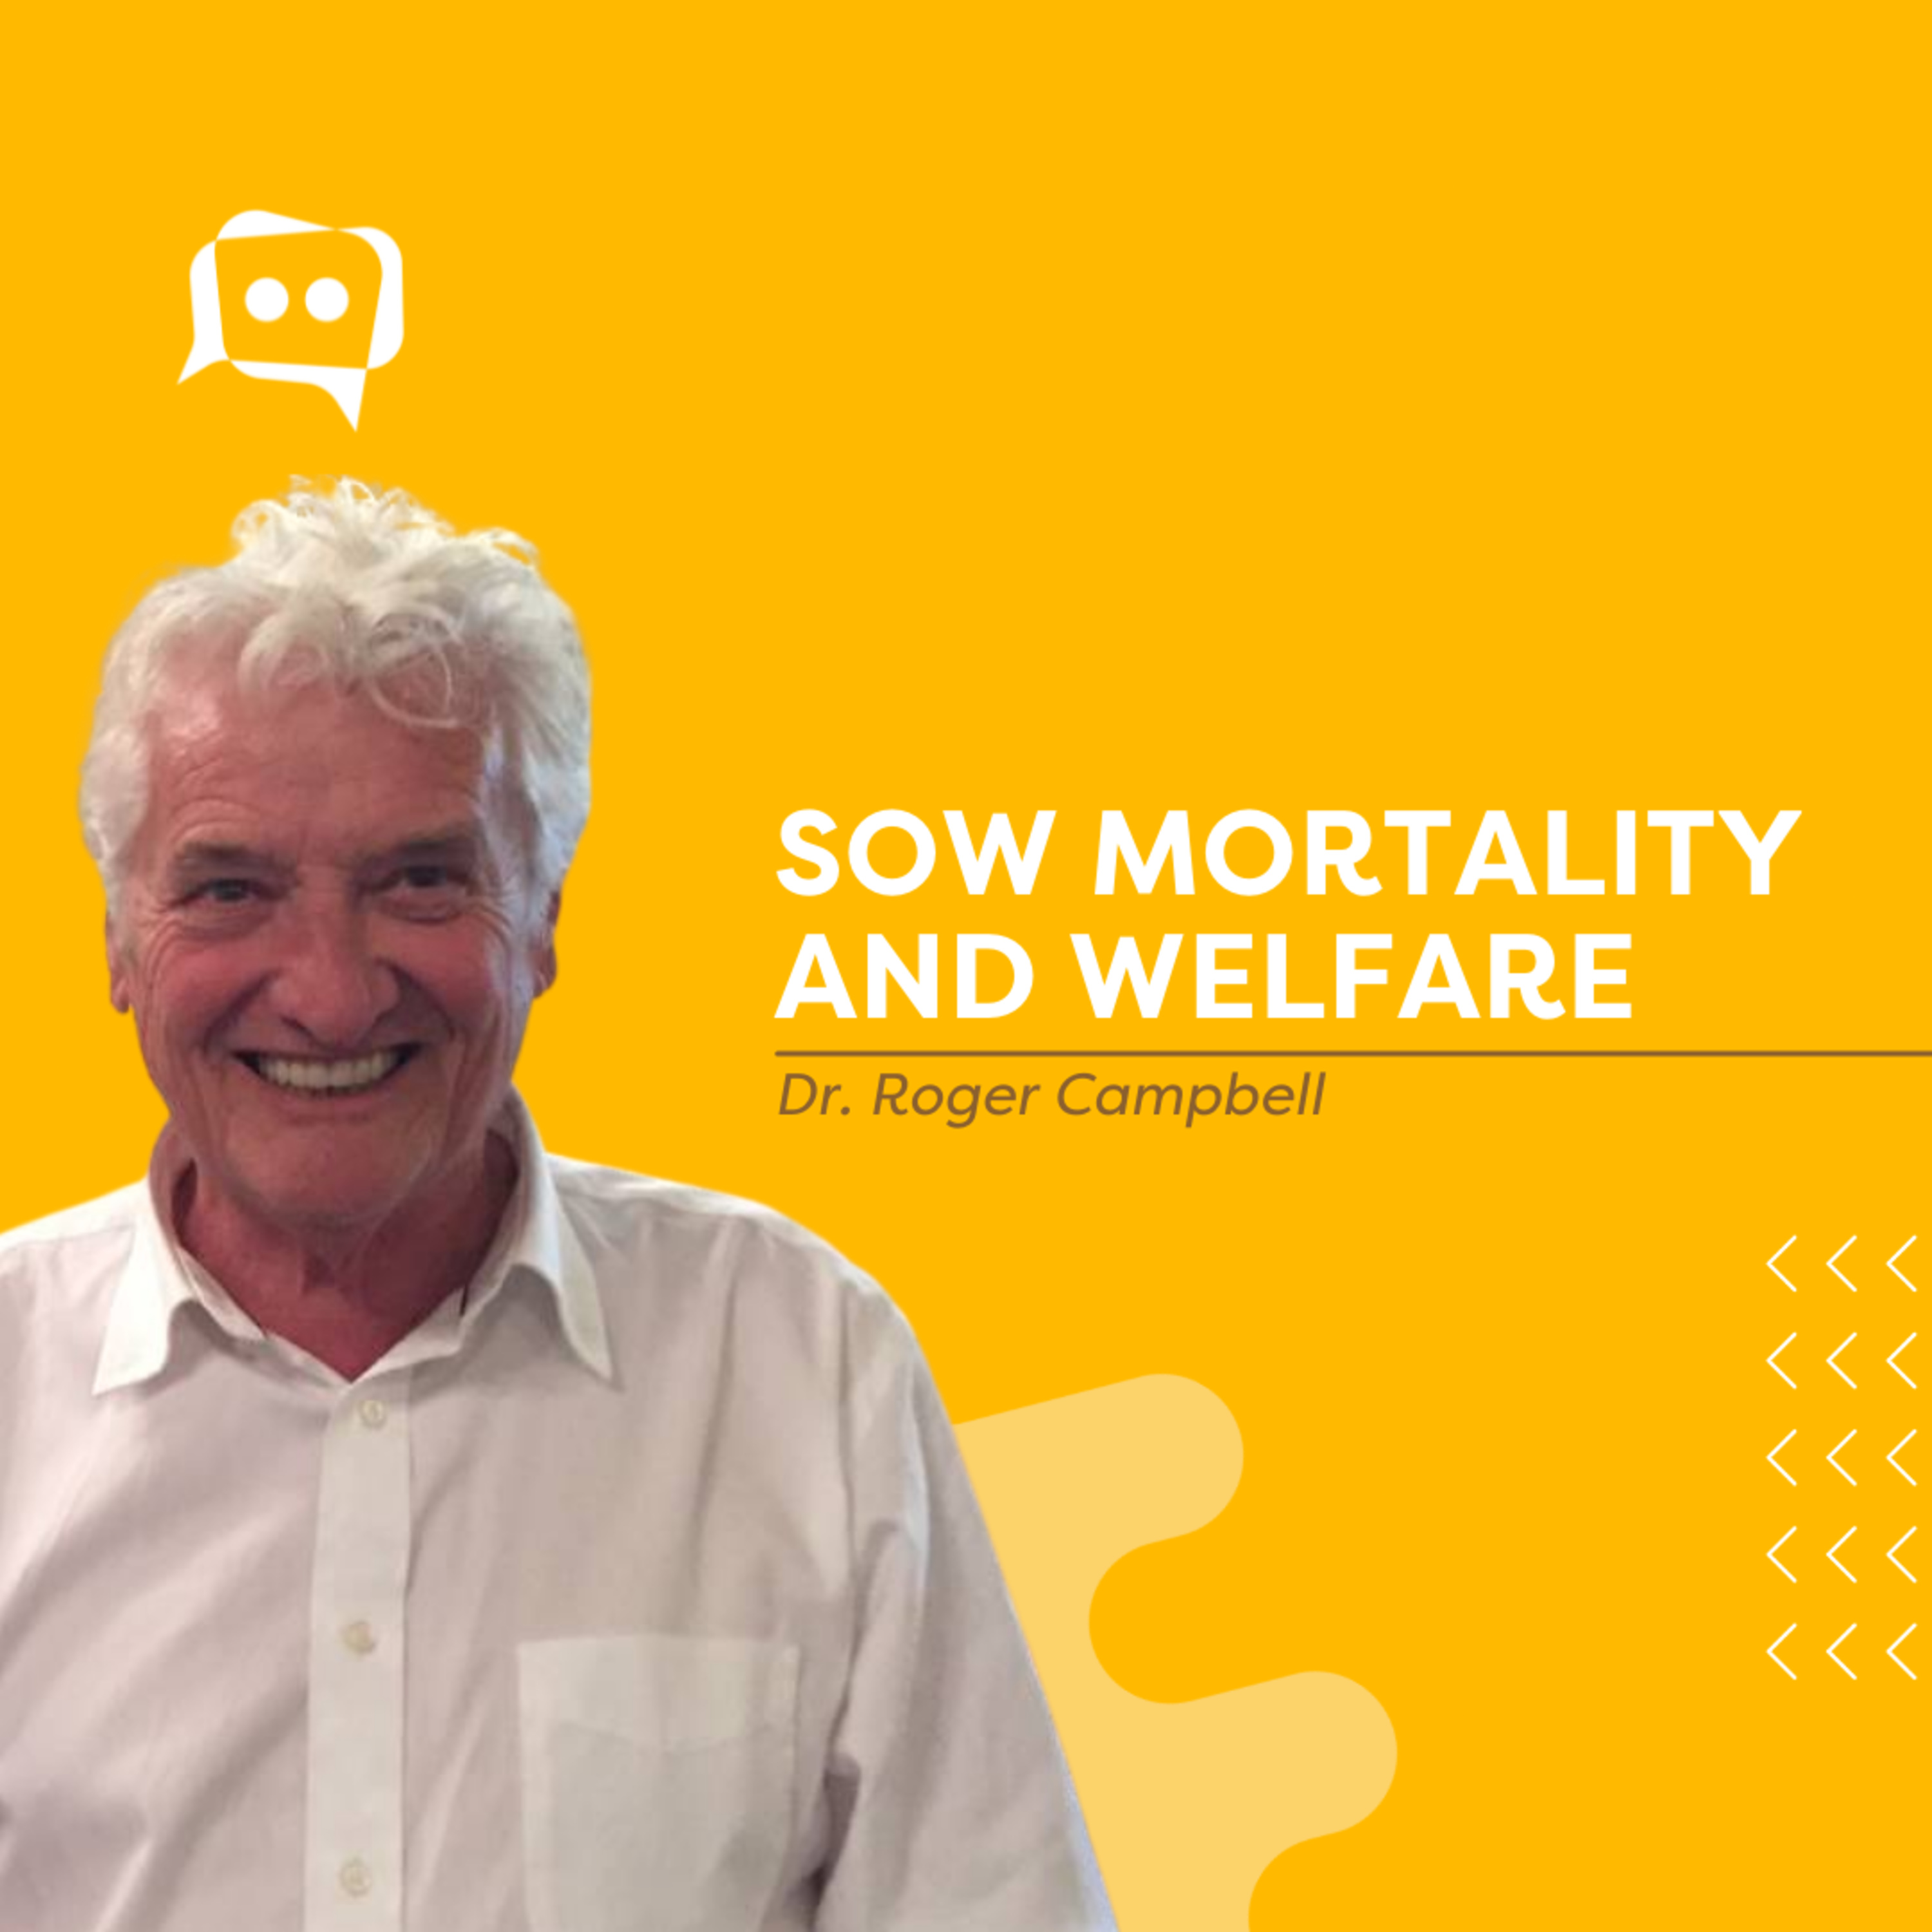 #SHORTS: Sow mortality and welfare, with Dr. Roger Campbell